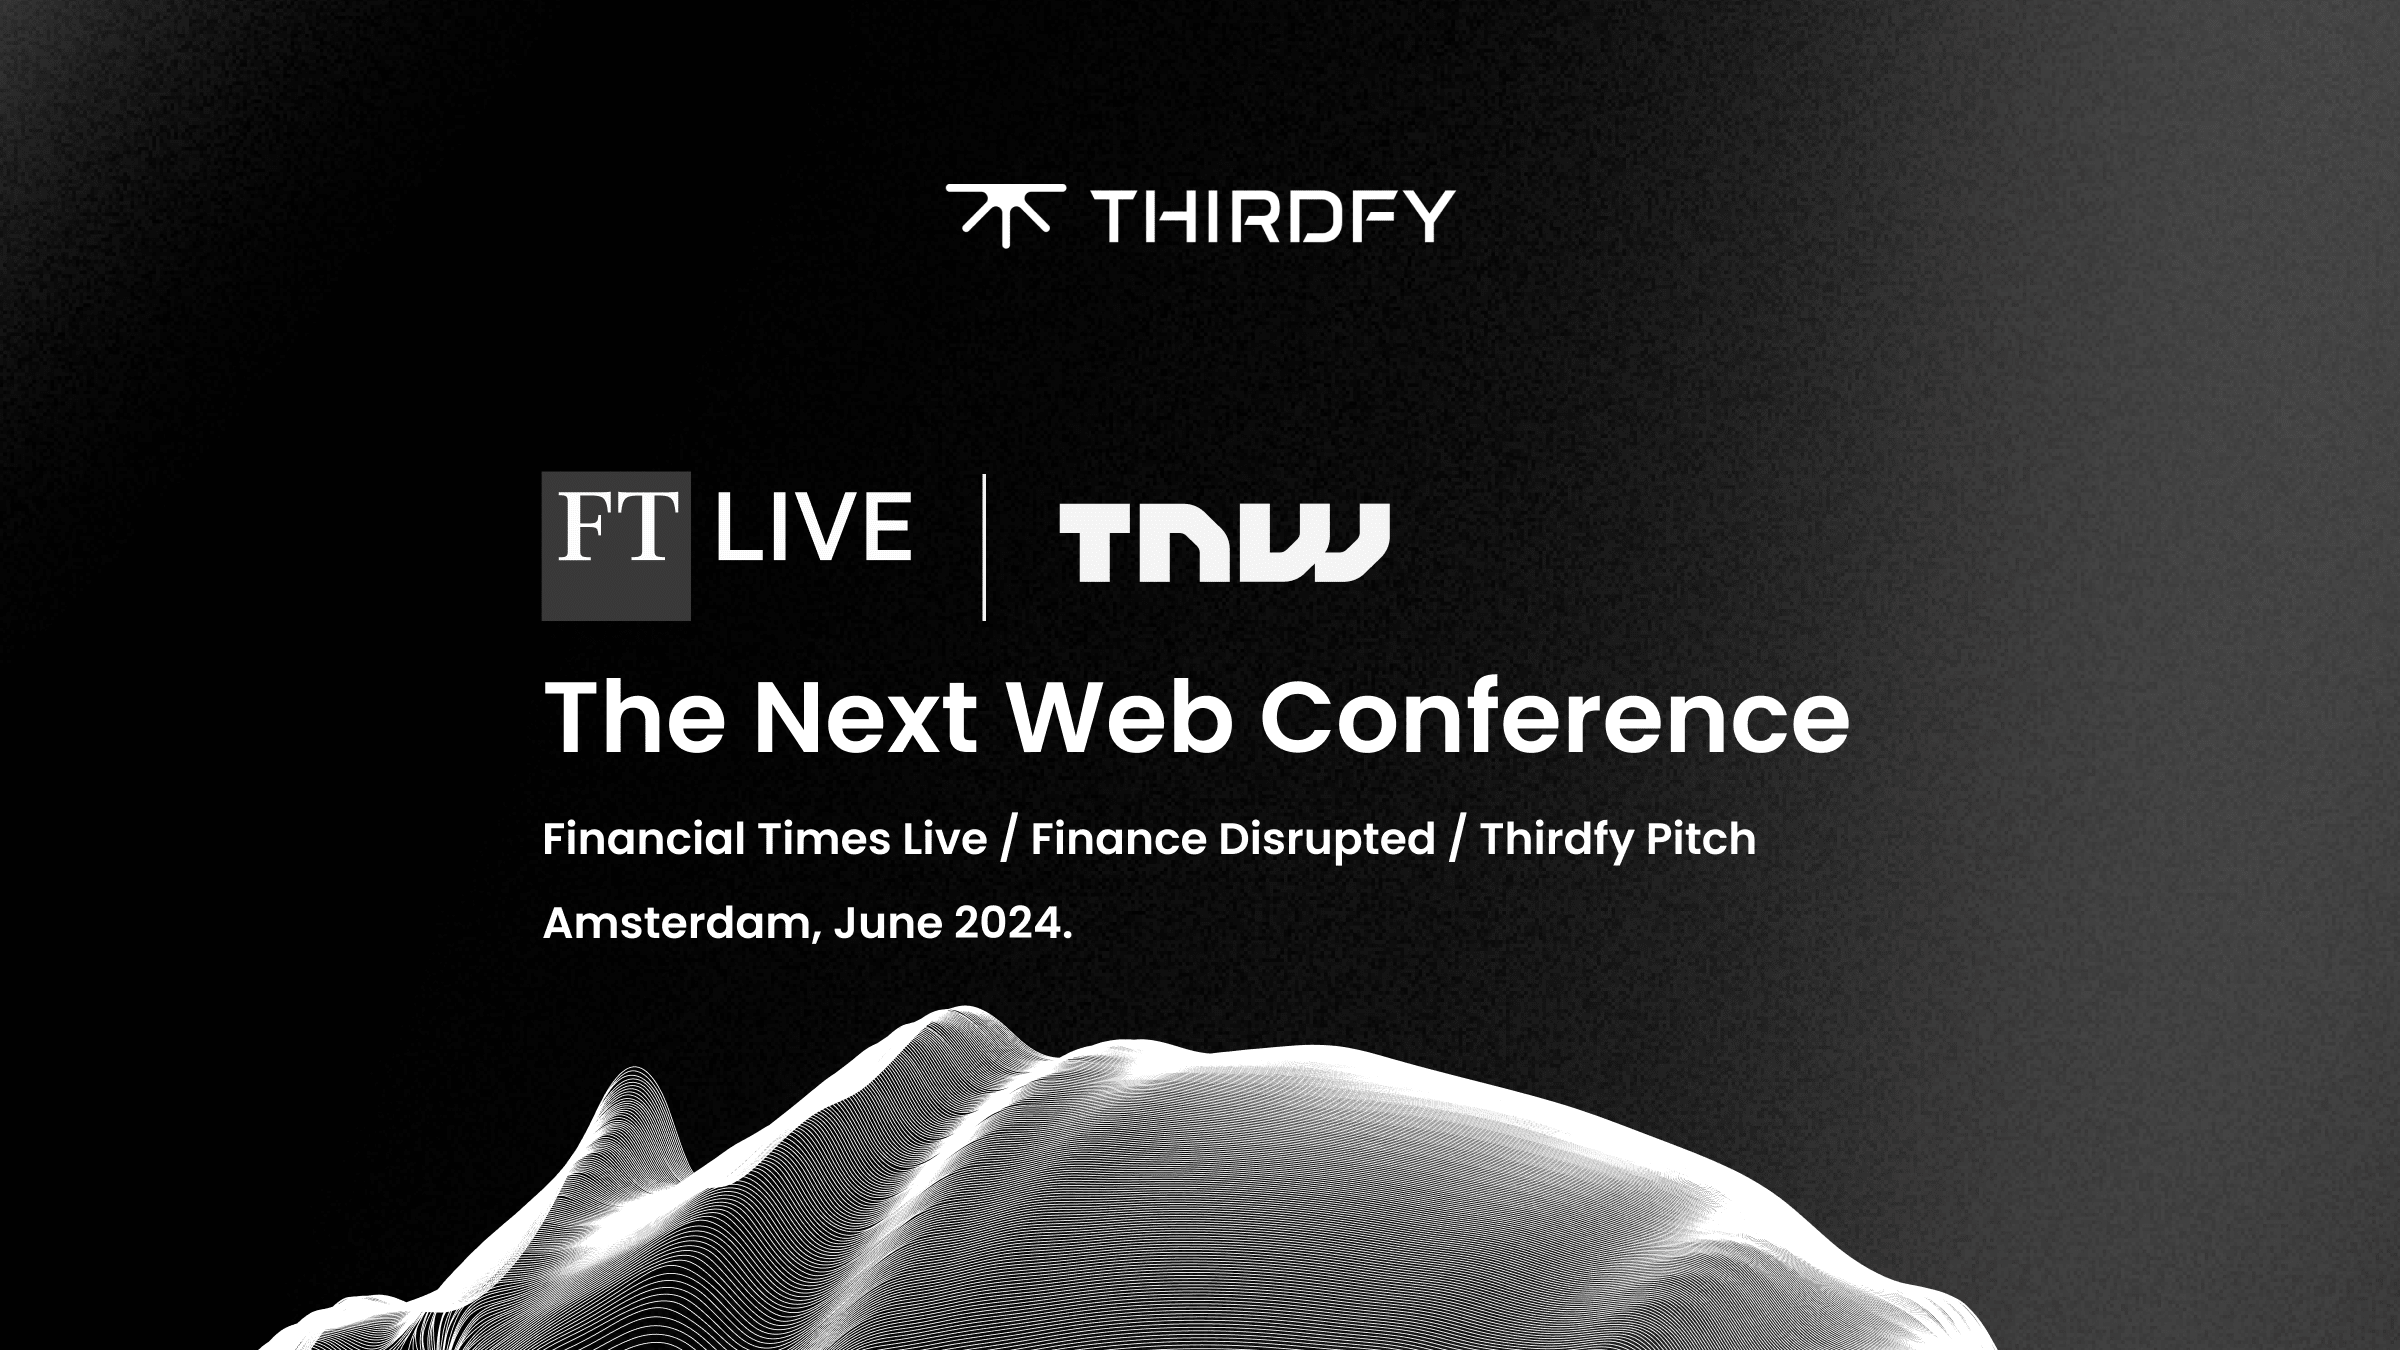 TNW Conference, Financial Times Live with Felipe Rieger